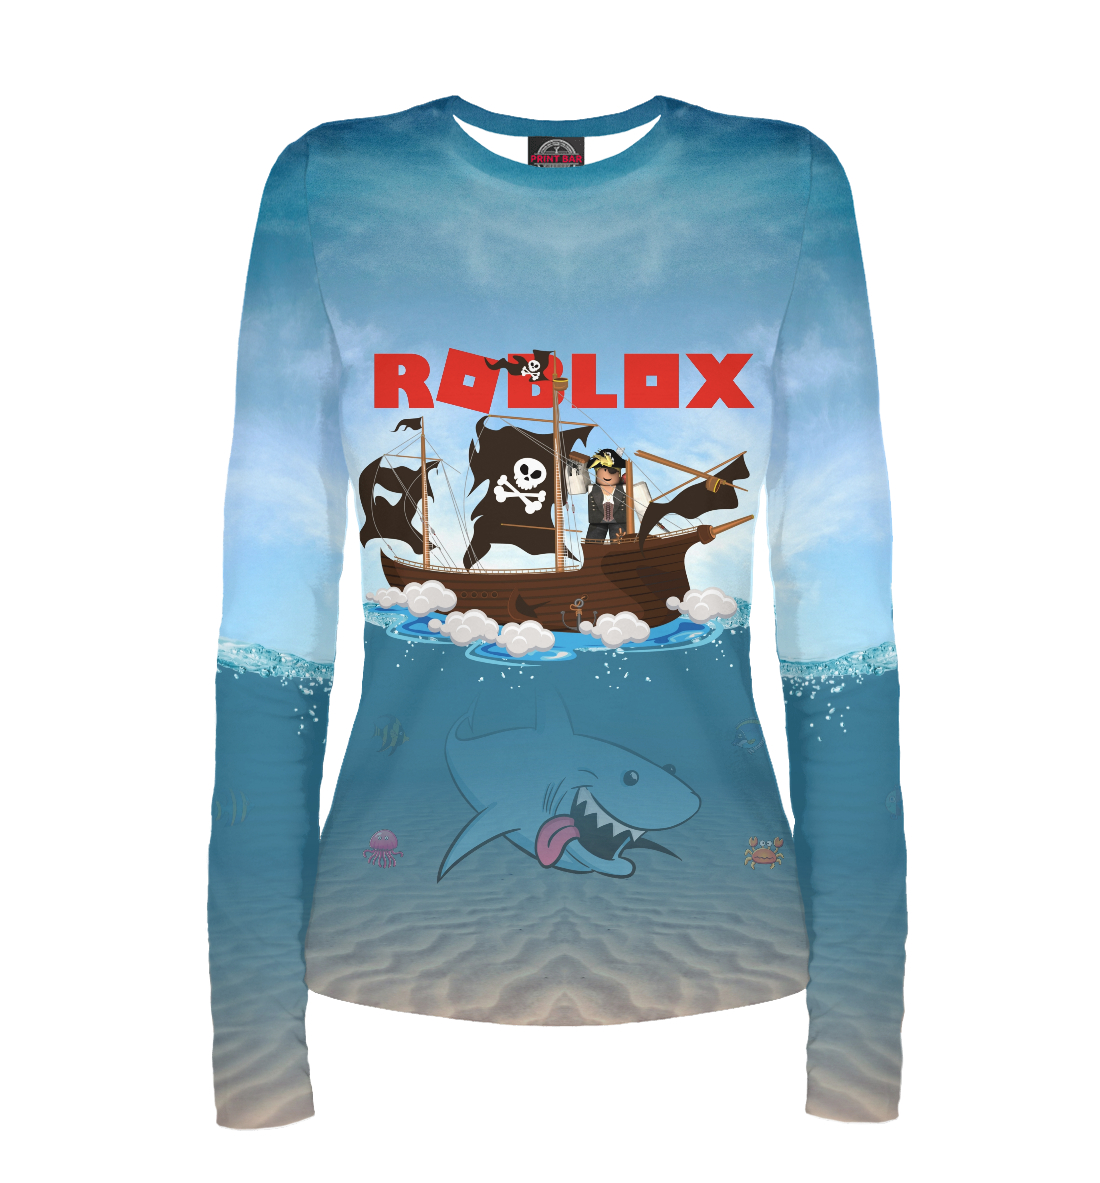 Roblox Buy At The Price Of 1 599 00 Rub In Printbar Ru Imall Com - rbx boots com roblox